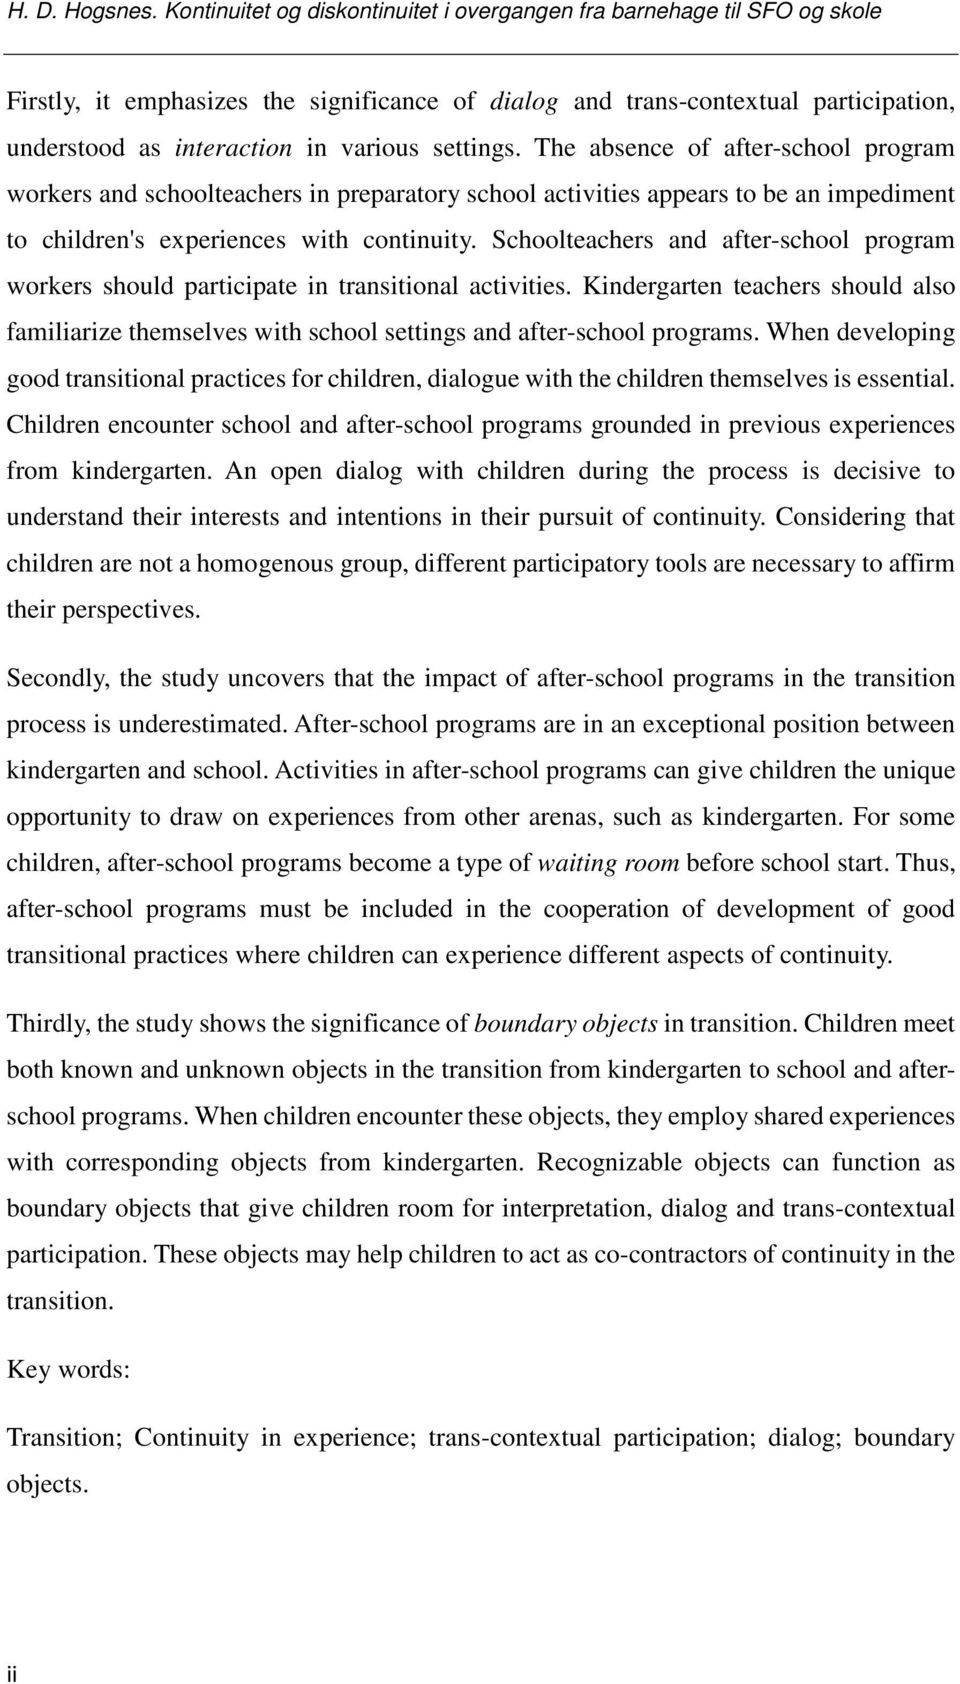 settings. The absence of after-school program workers and schoolteachers in preparatory school activities appears to be an impediment to children's experiences with continuity.